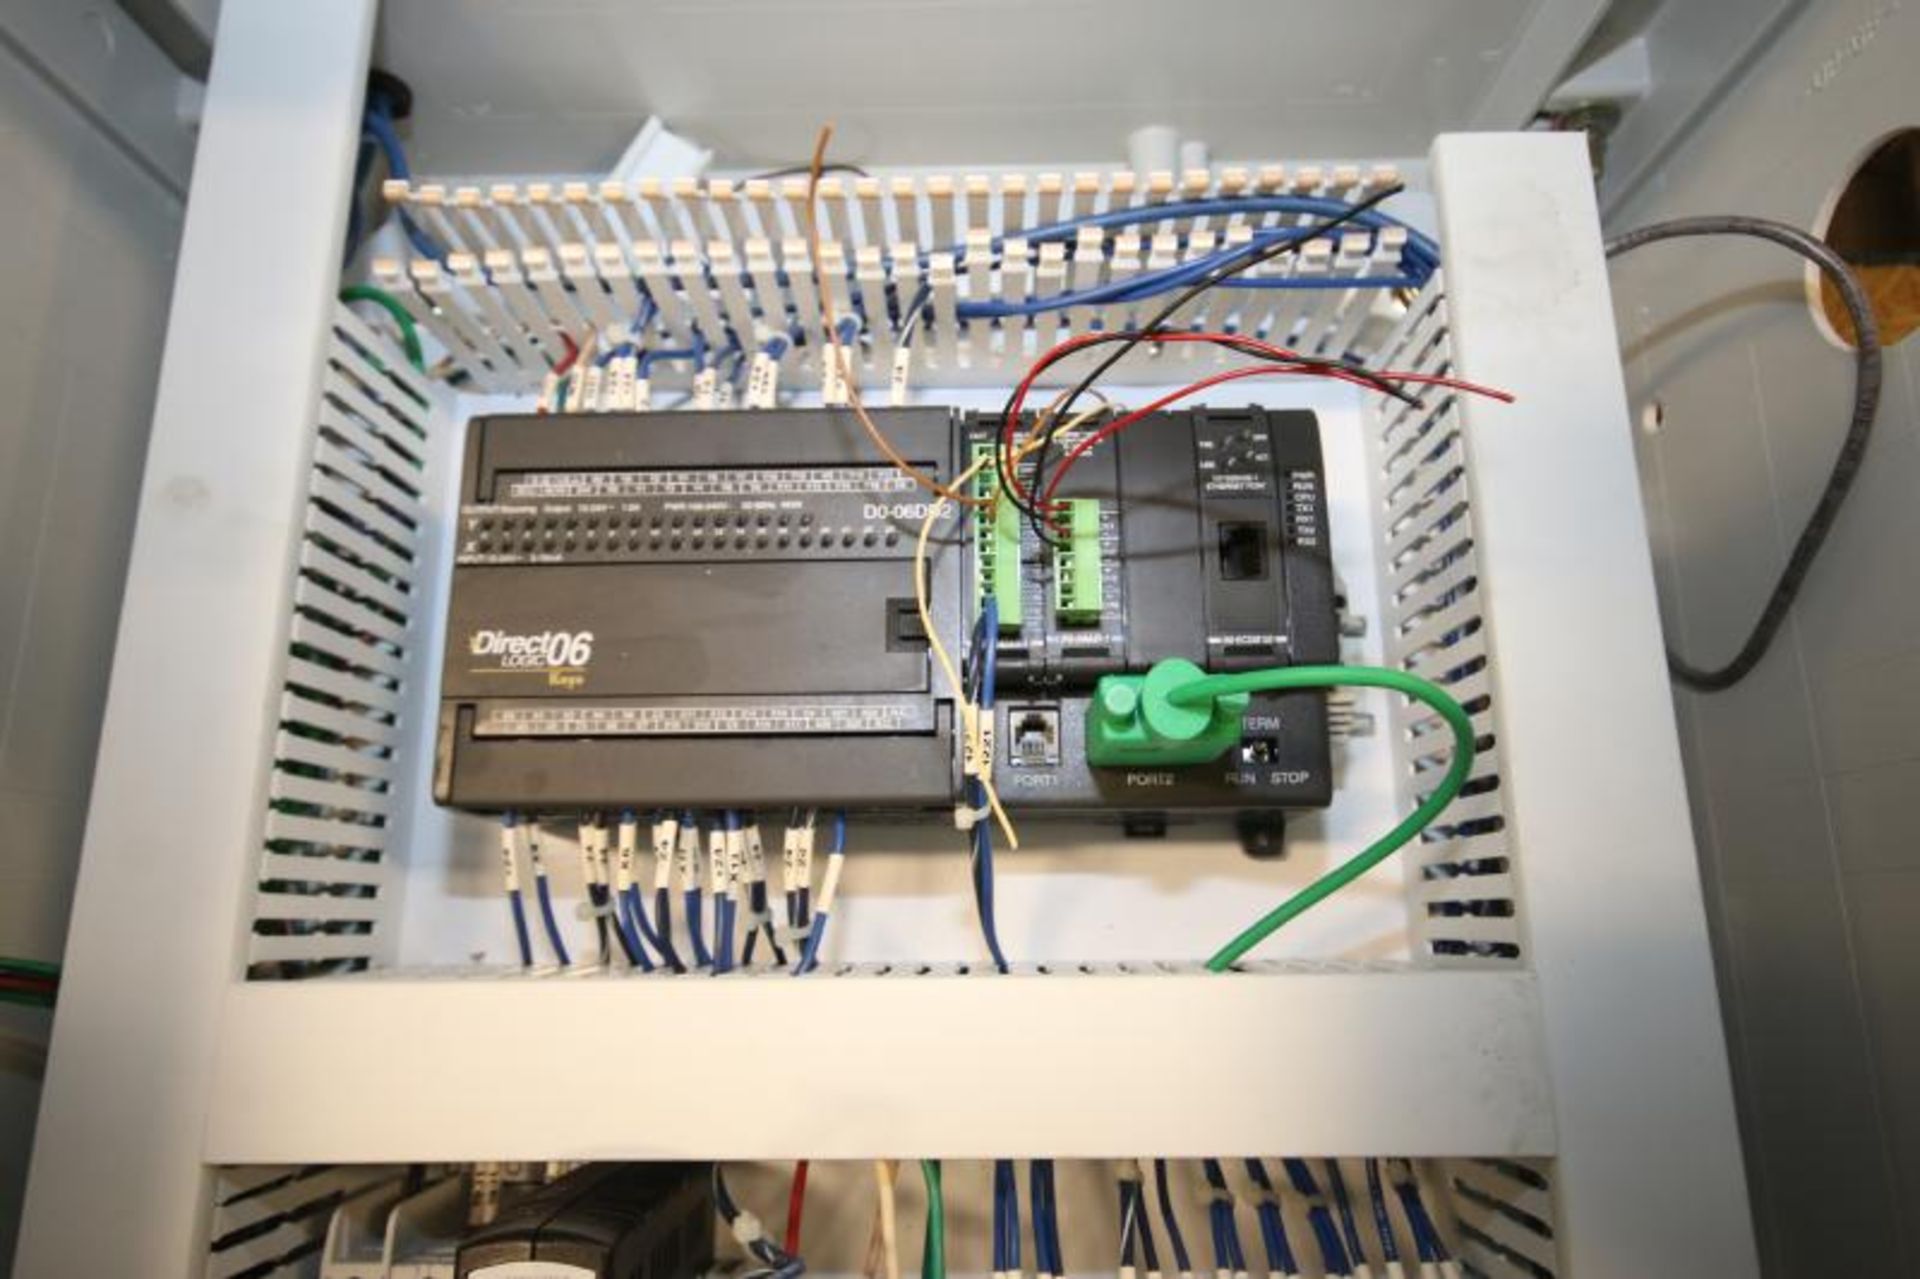 Aprox. 30" L x 20" W x 13" D Resin Control Box with Koyo Direct Logic 06 PLC Controller with - Image 3 of 4